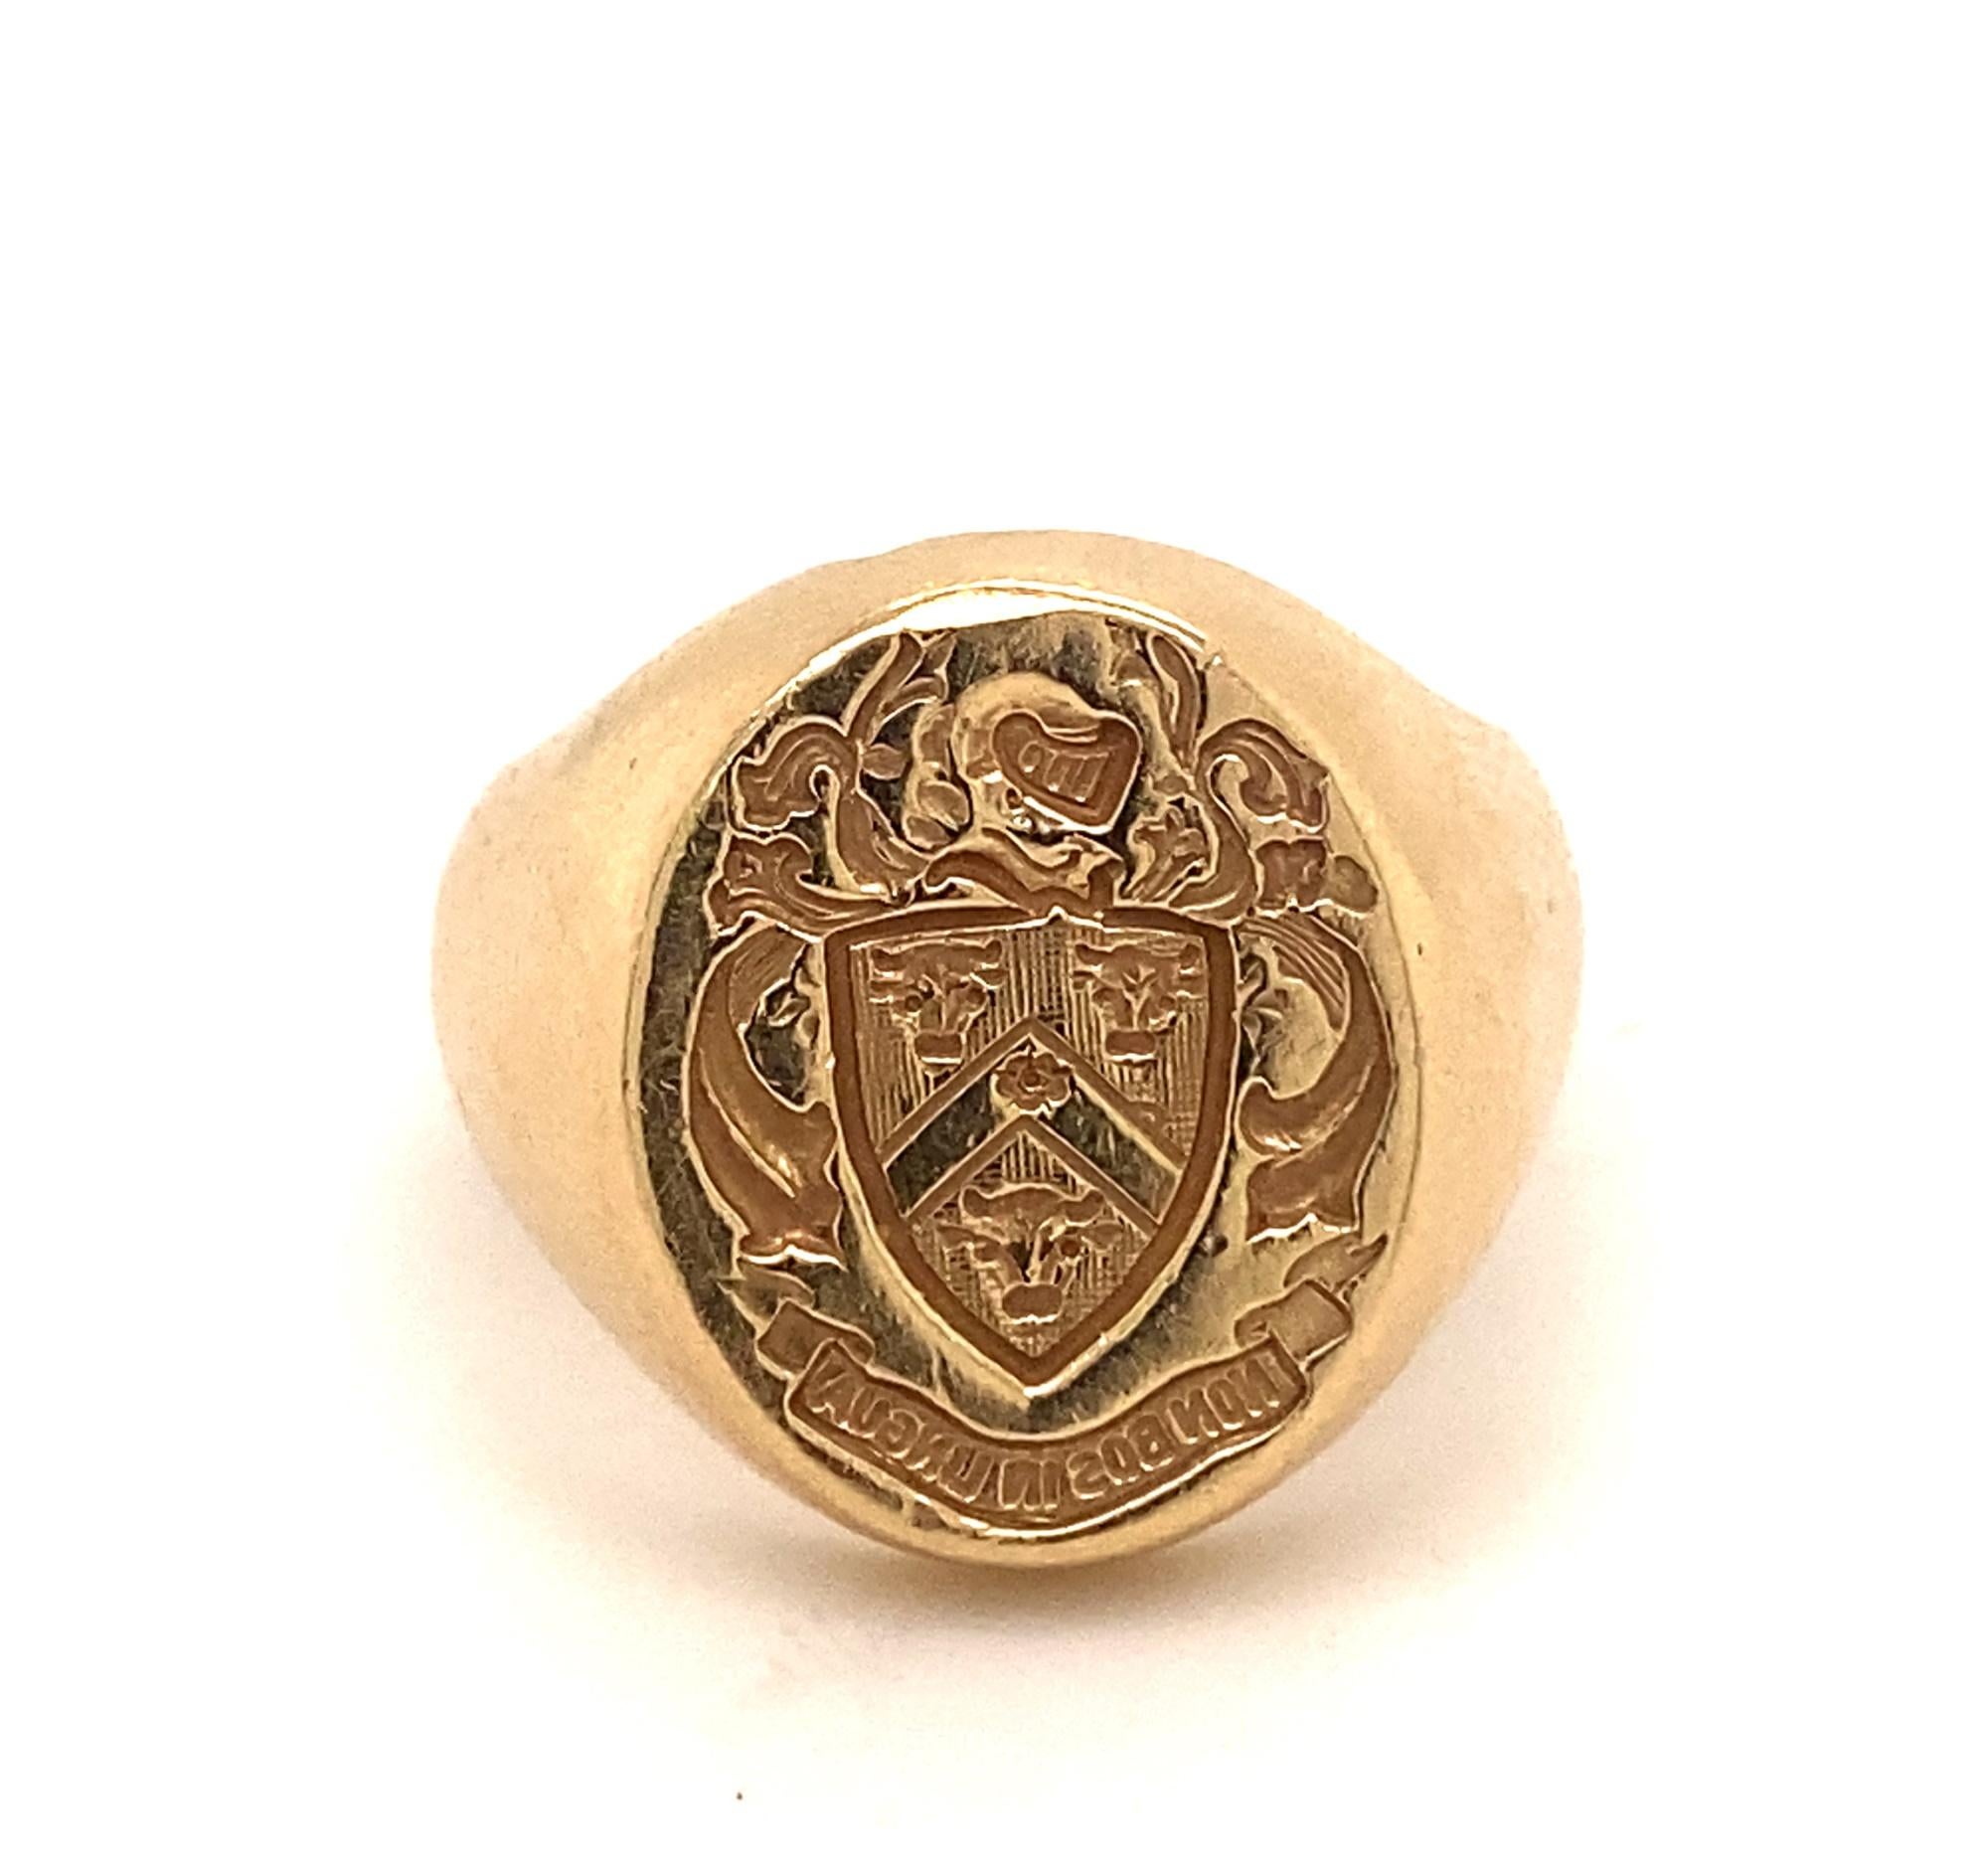 This is a rare antique signet ring with a crest of three bulls and knight.  Under the crest it reads Non bos in Lingua.  The crest and has amazing the detail and design.  The ring is marked 14k makers marks, inscribed initials JAP and R53 it also